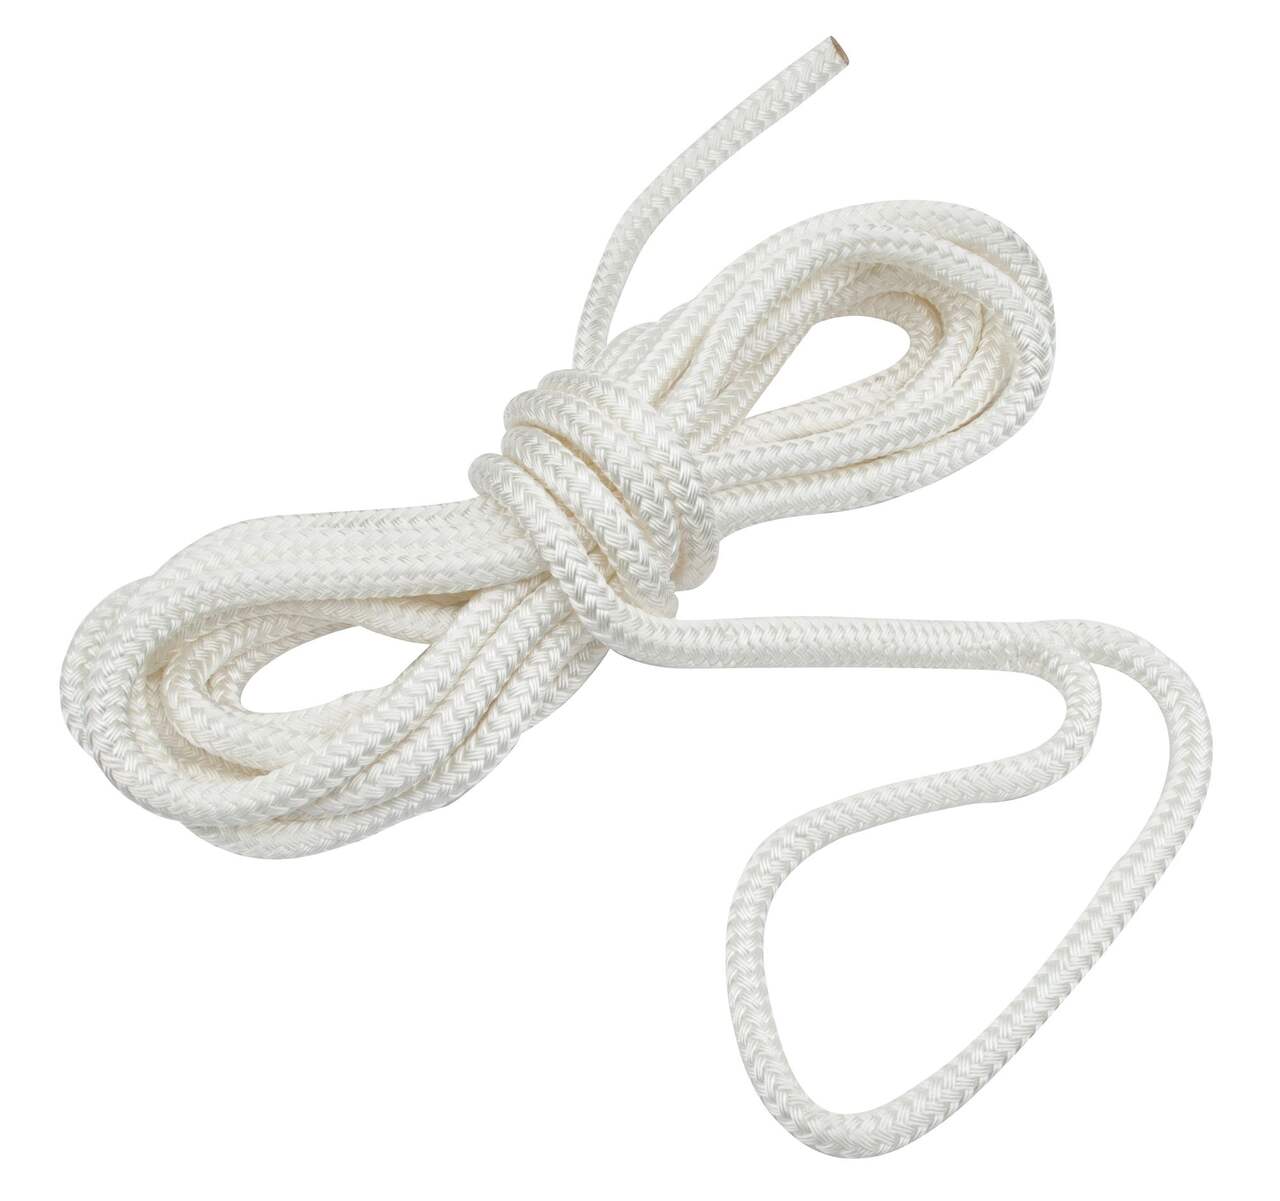 https://media-www.canadiantire.ca/product/playing/seasonal-recreation/marine-power-boating/0793704/large-vessel-5-8-by-25-braided-white-marine-rope-f222853d-25fd-4b43-a59f-c9944694c898-jpgrendition.jpg?imdensity=1&imwidth=640&impolicy=mZoom